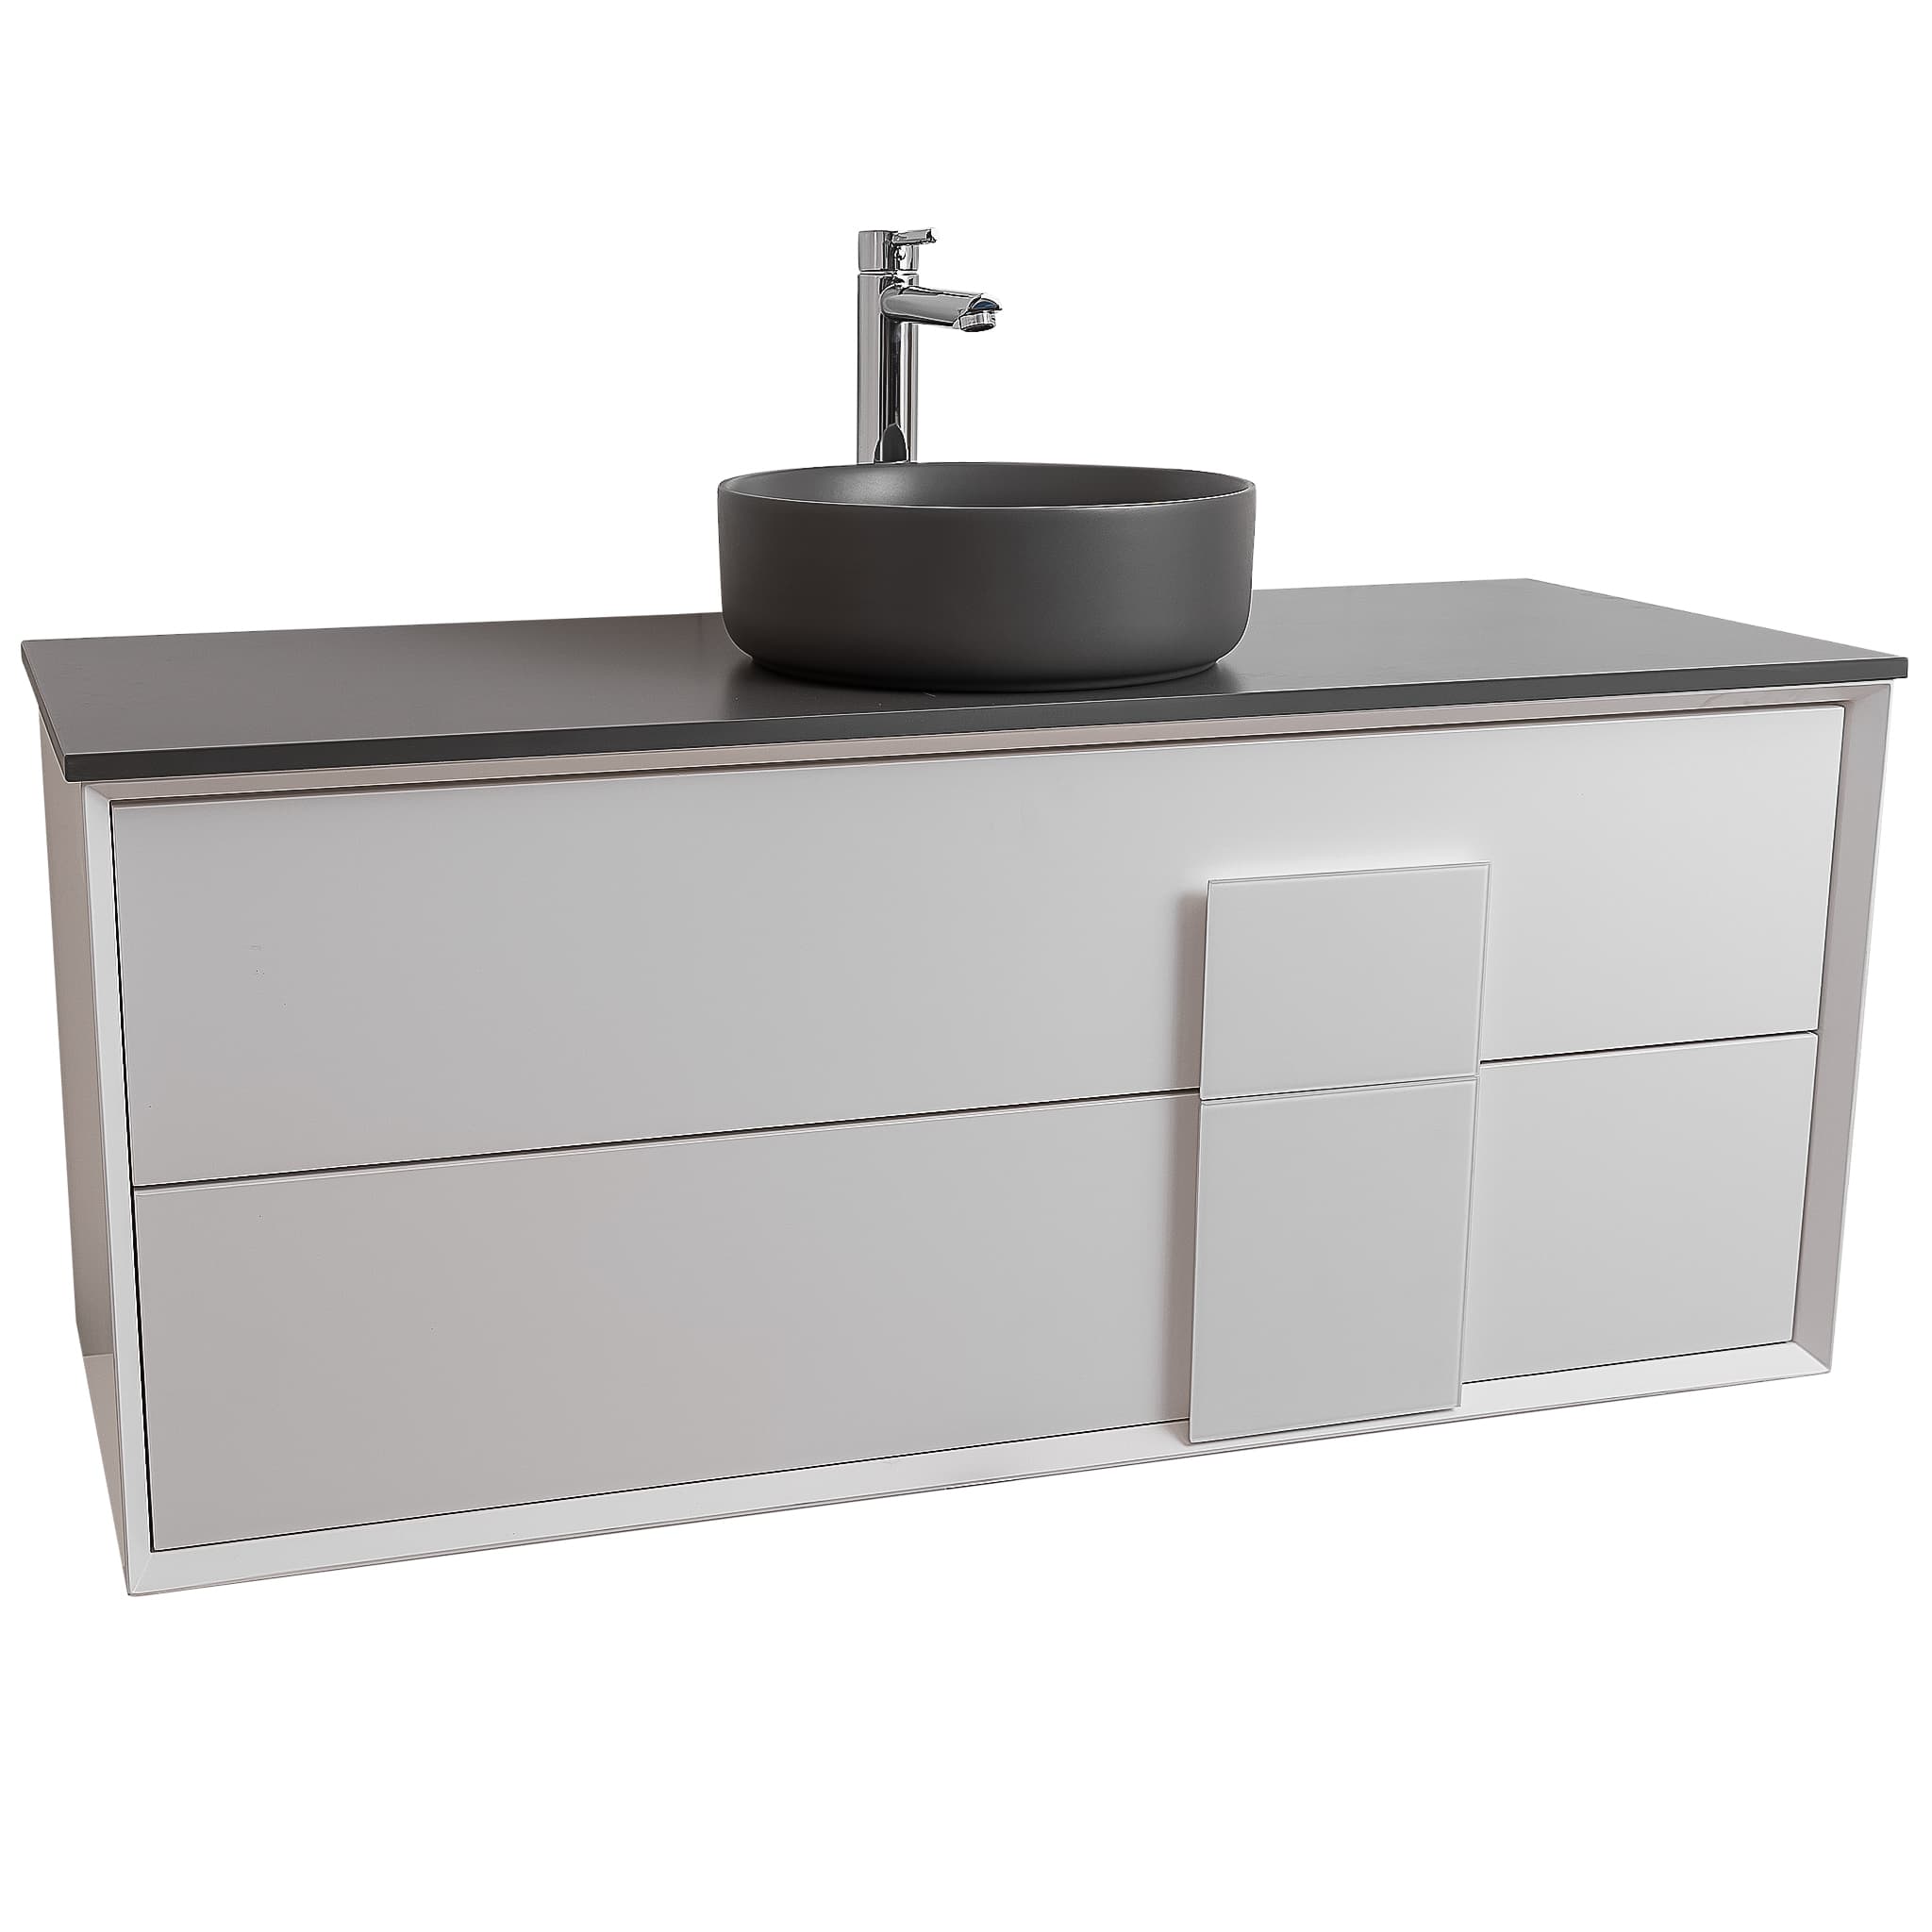 Piazza 47.5 Matte White With White Handle Cabinet, Ares Grey Ceniza Top and Ares Grey Ceniza Ceramic Basin, Wall Mounted Modern Vanity Set